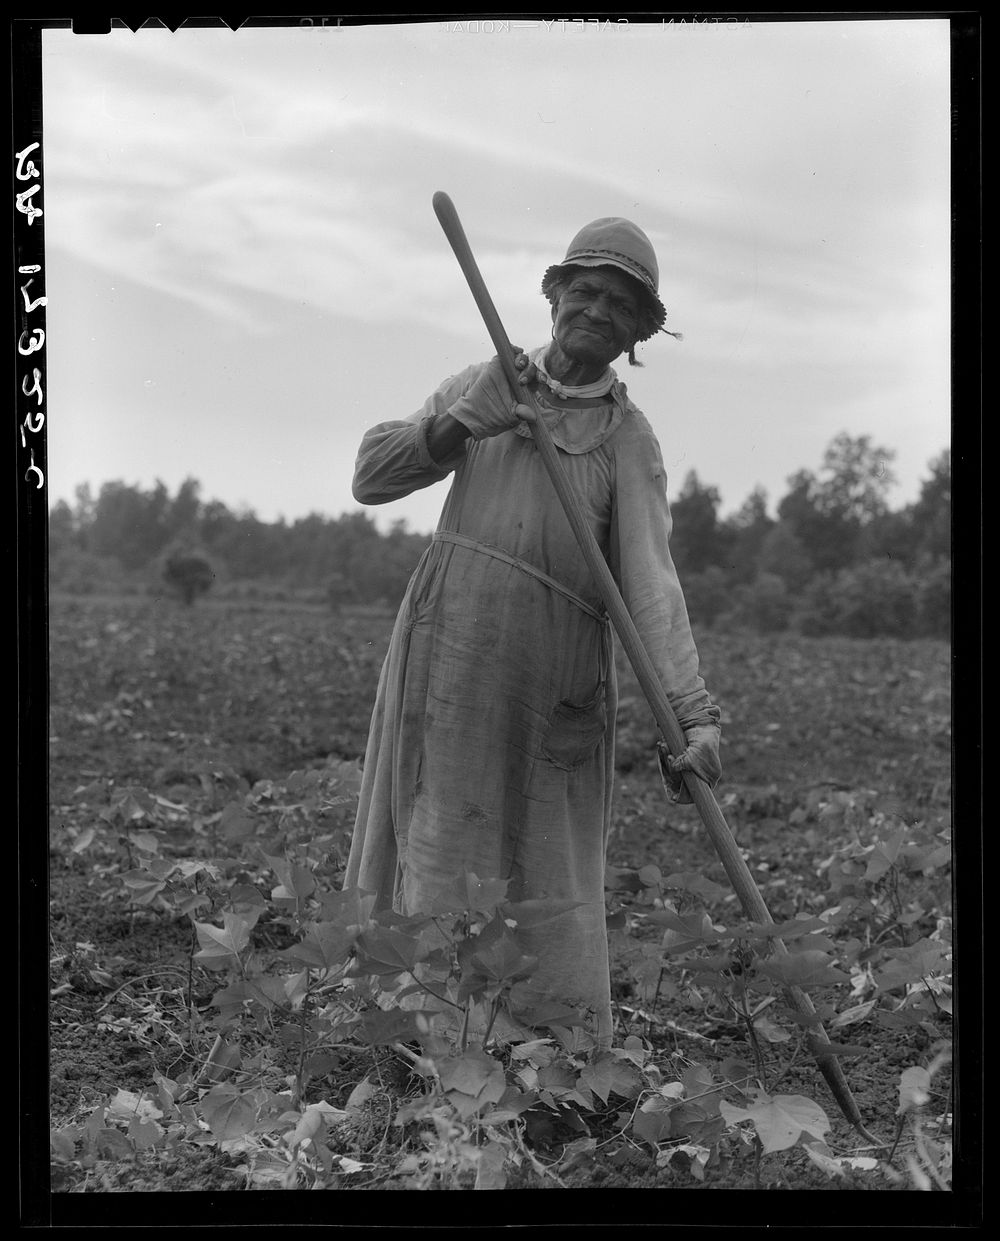 Mississippi Negress hoeing cotton. She was born a slave "two years before the surrender" by Dorothea Lange